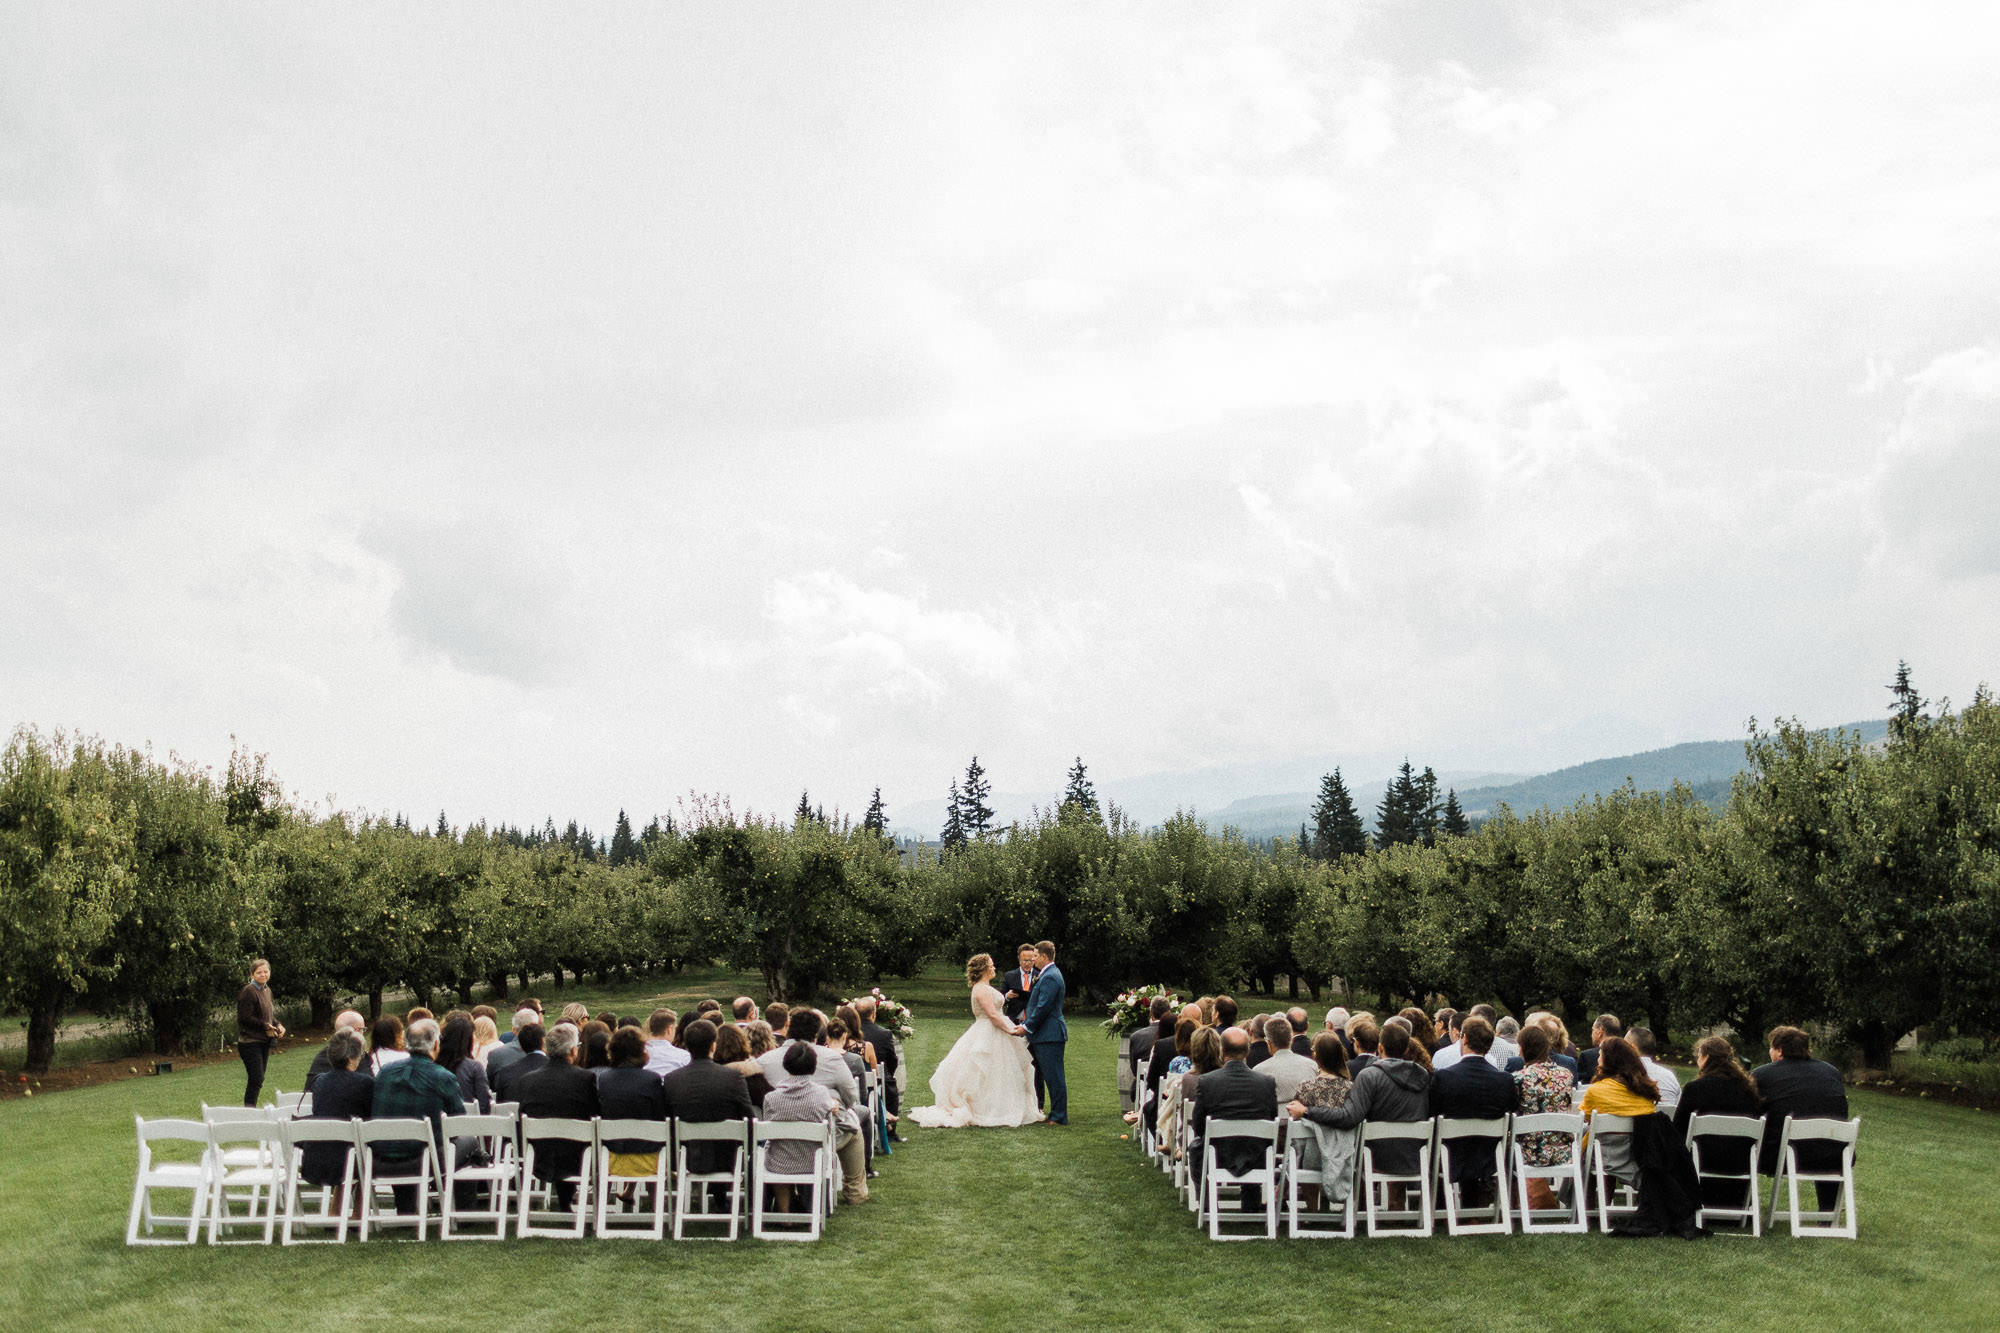 A wide shot shows the wedding ceremony and its surroundings at Mt. View Orchards.